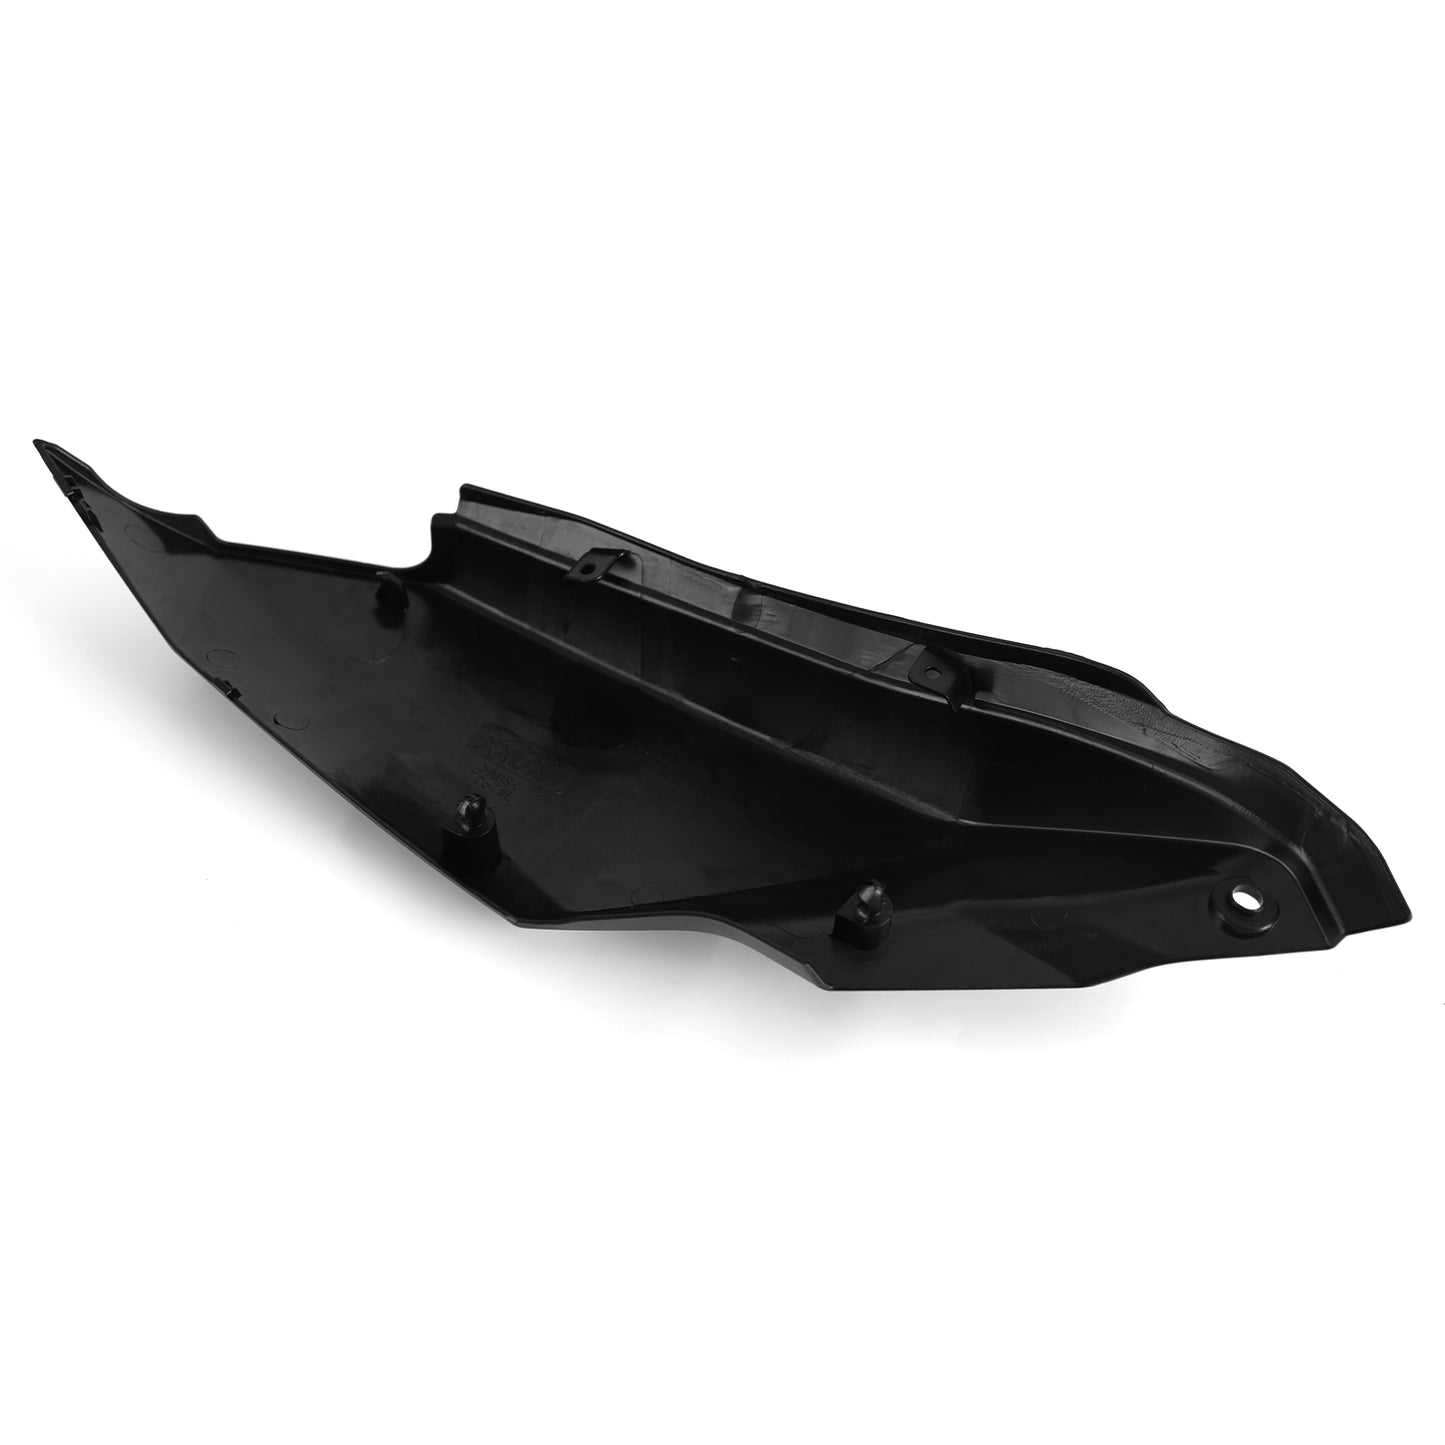 Unpainted Rear Seat Side Cover Panel Fairing Cowl for Honda X-ADV 750 2017-2020